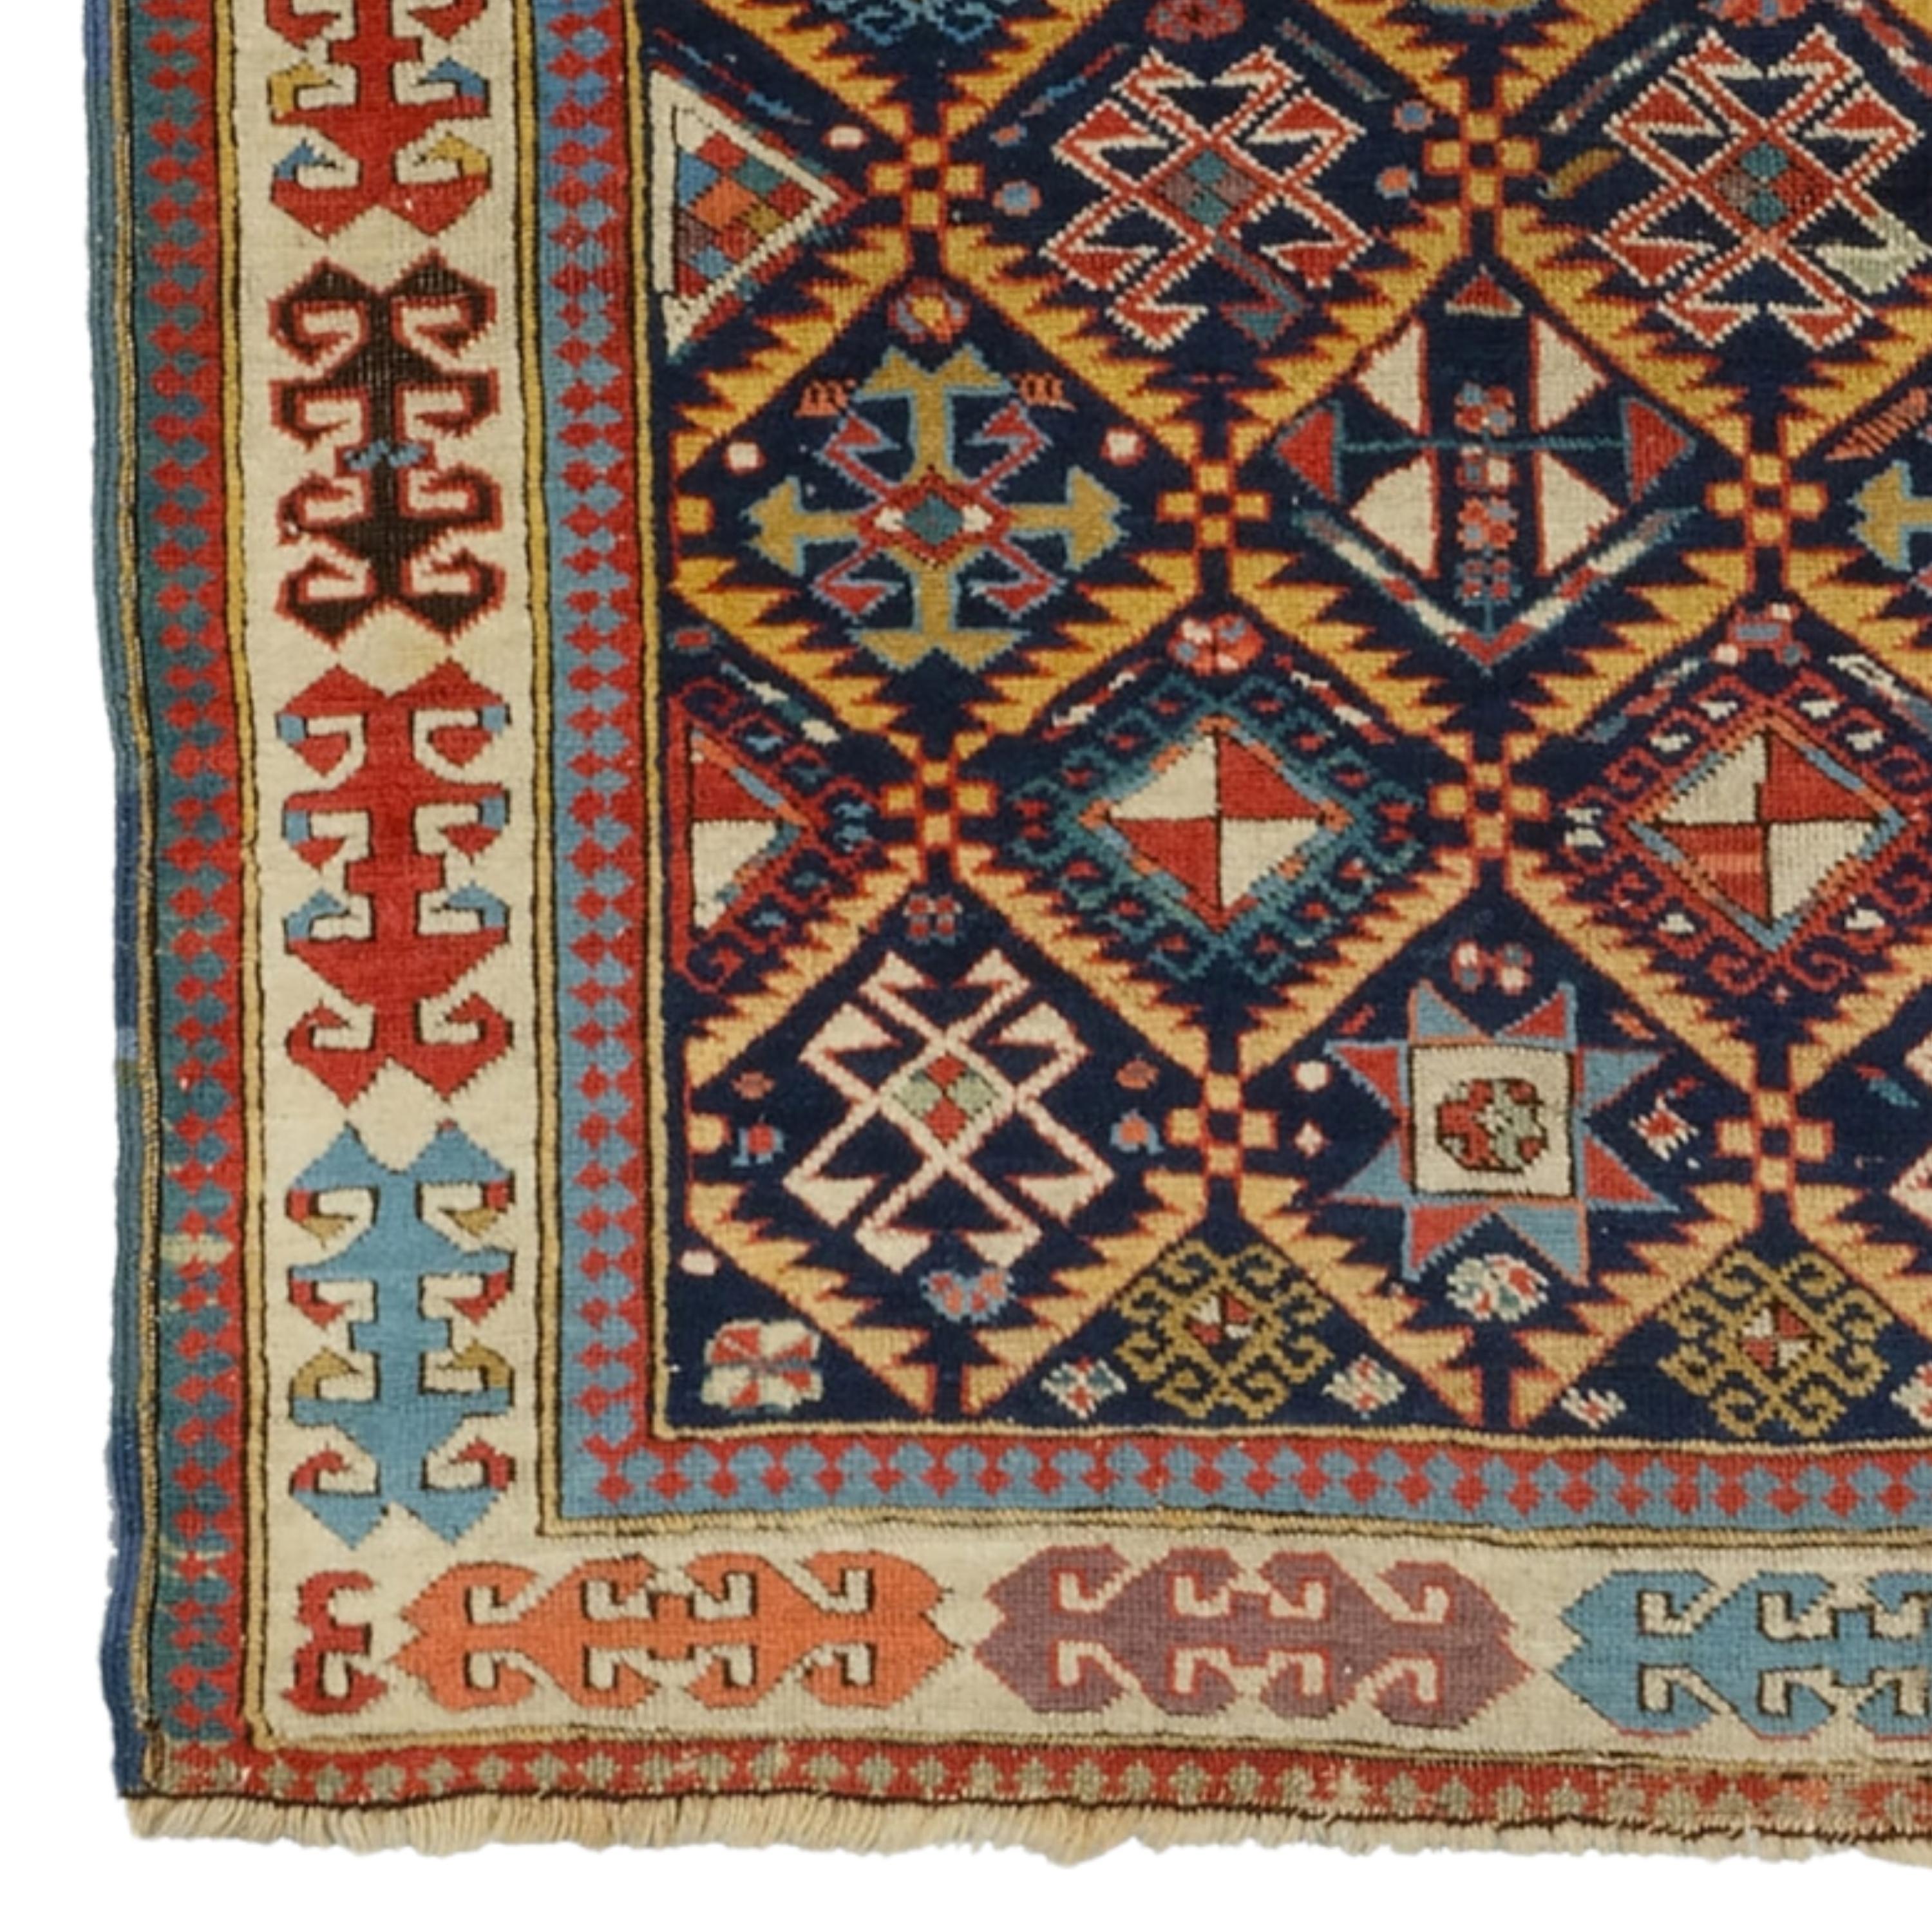 Middle of the 19th Century Akstafa Prayer Rug
Size : 87 x 182 cm

This impressive mid-19th-century Akstafa Carpet is a masterpiece reflecting the elegant and sophisticated craftsmanship of a historic period.

Rich Patterns: The carpet is decorated